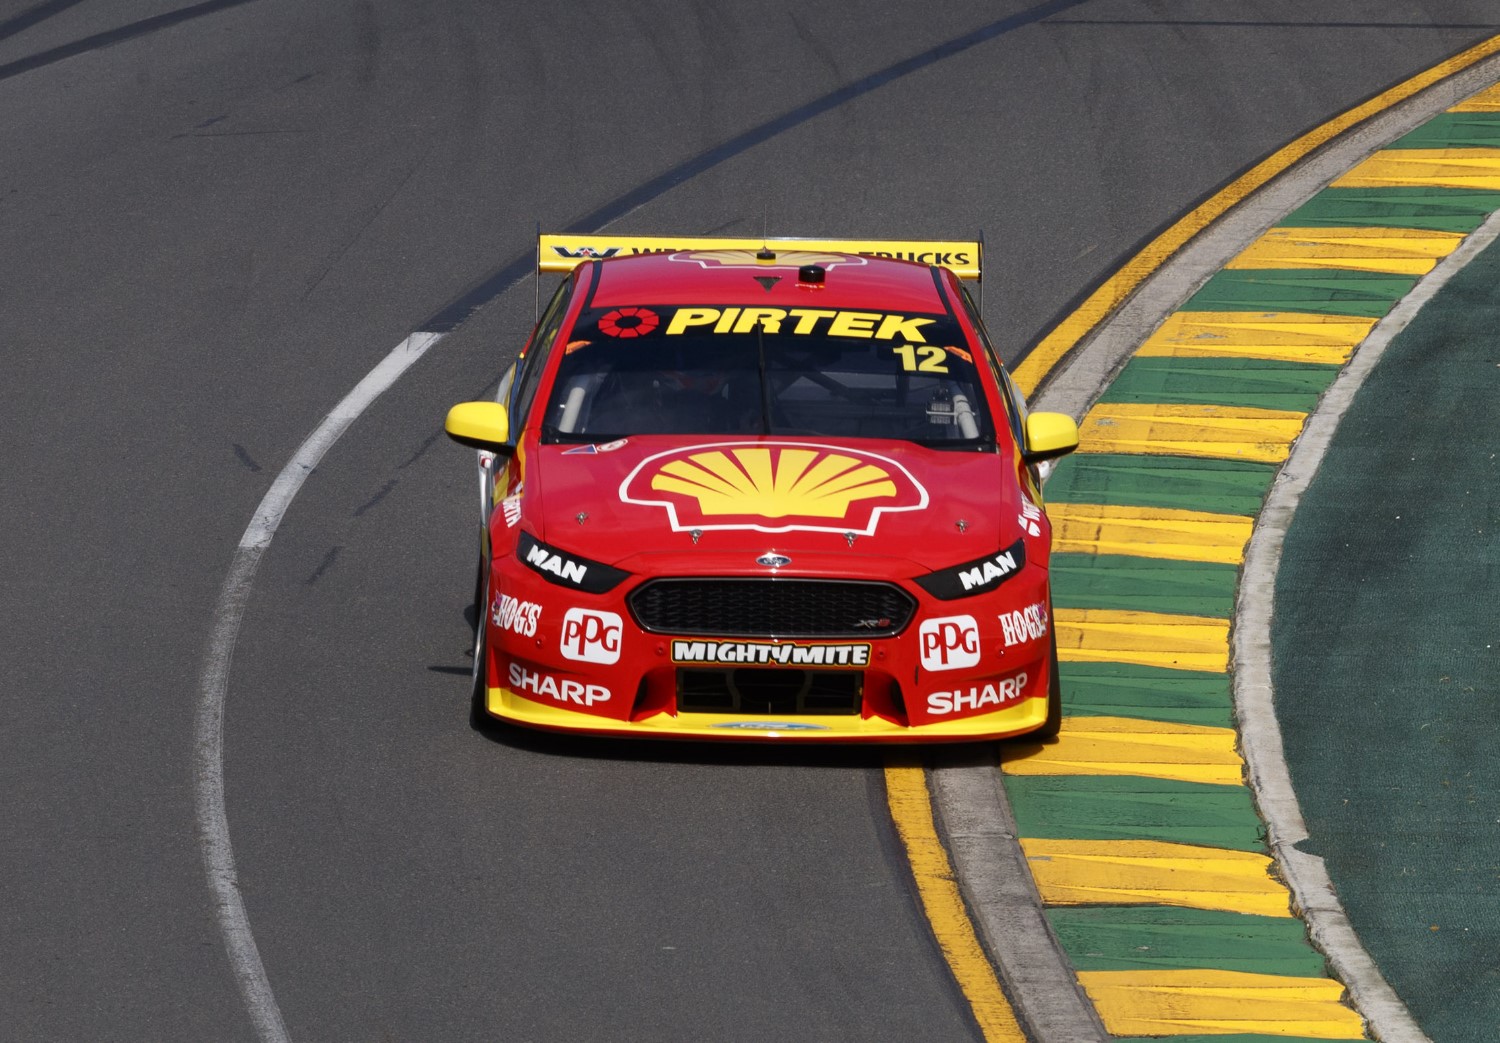 Coulthard races to victory